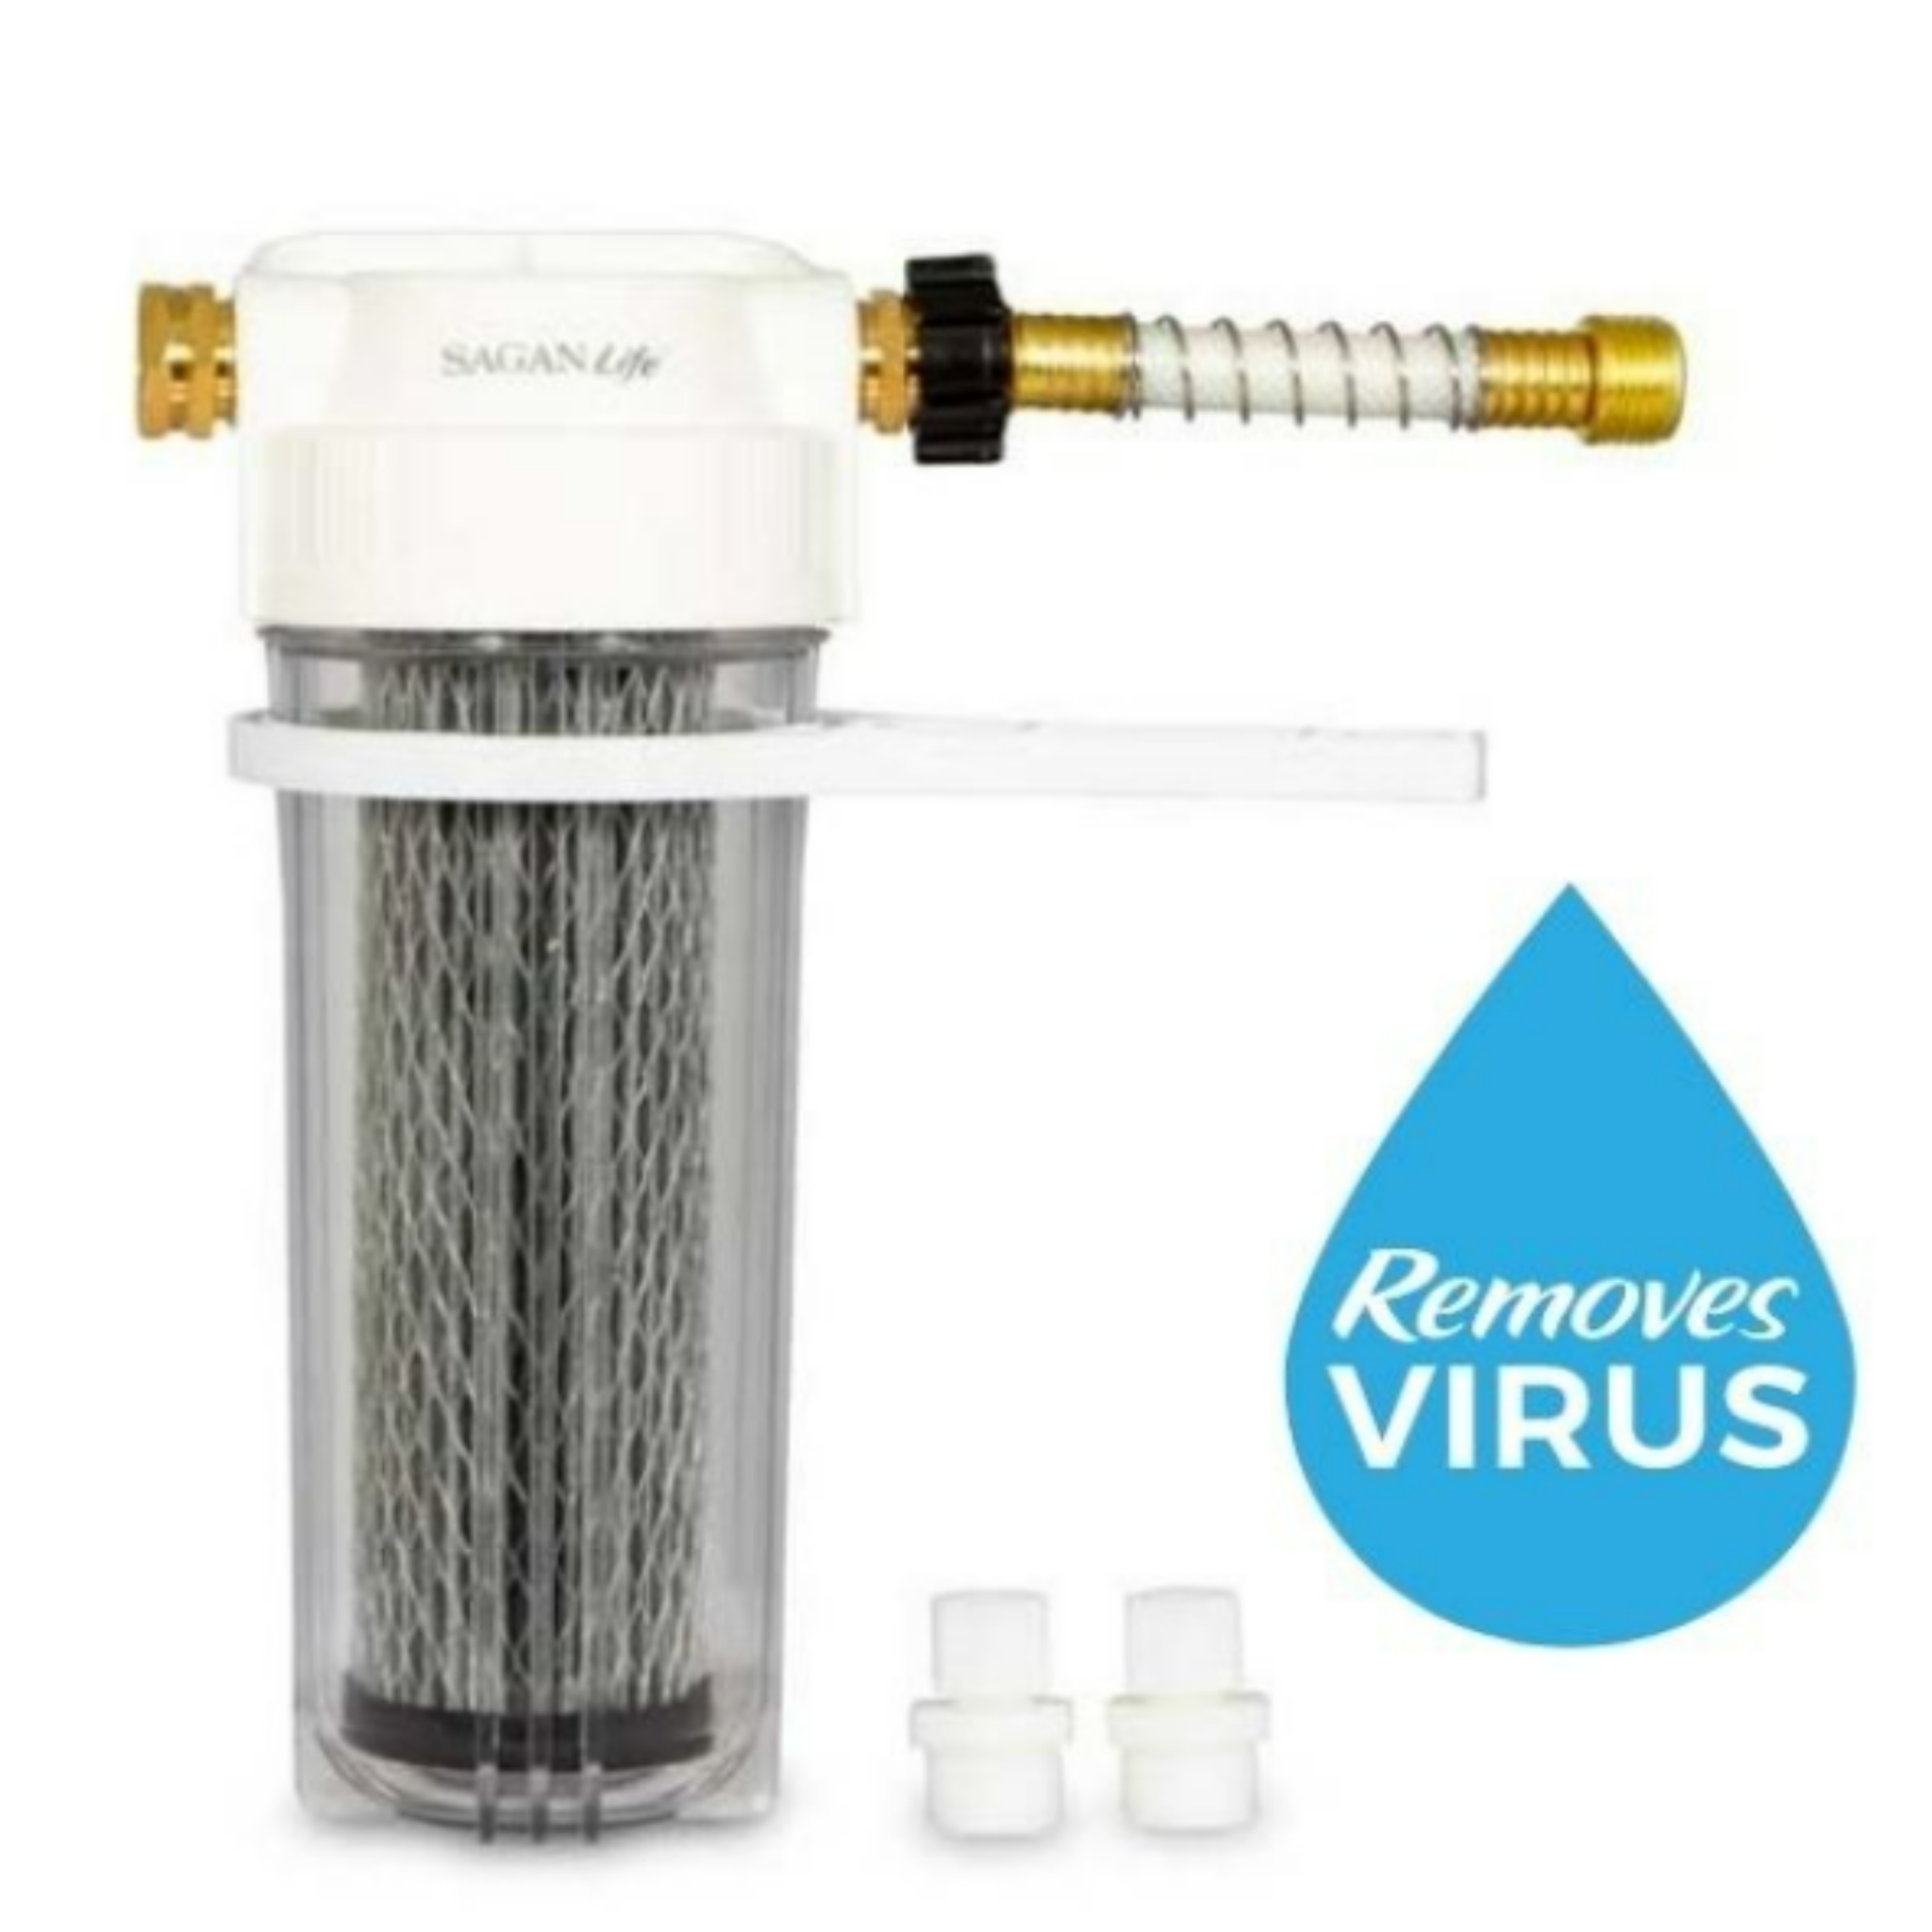 Sagan RV Water Filter Kit / Undersink Water Filter Kit for RVs, Campers, motor homes and recreational vehicles.